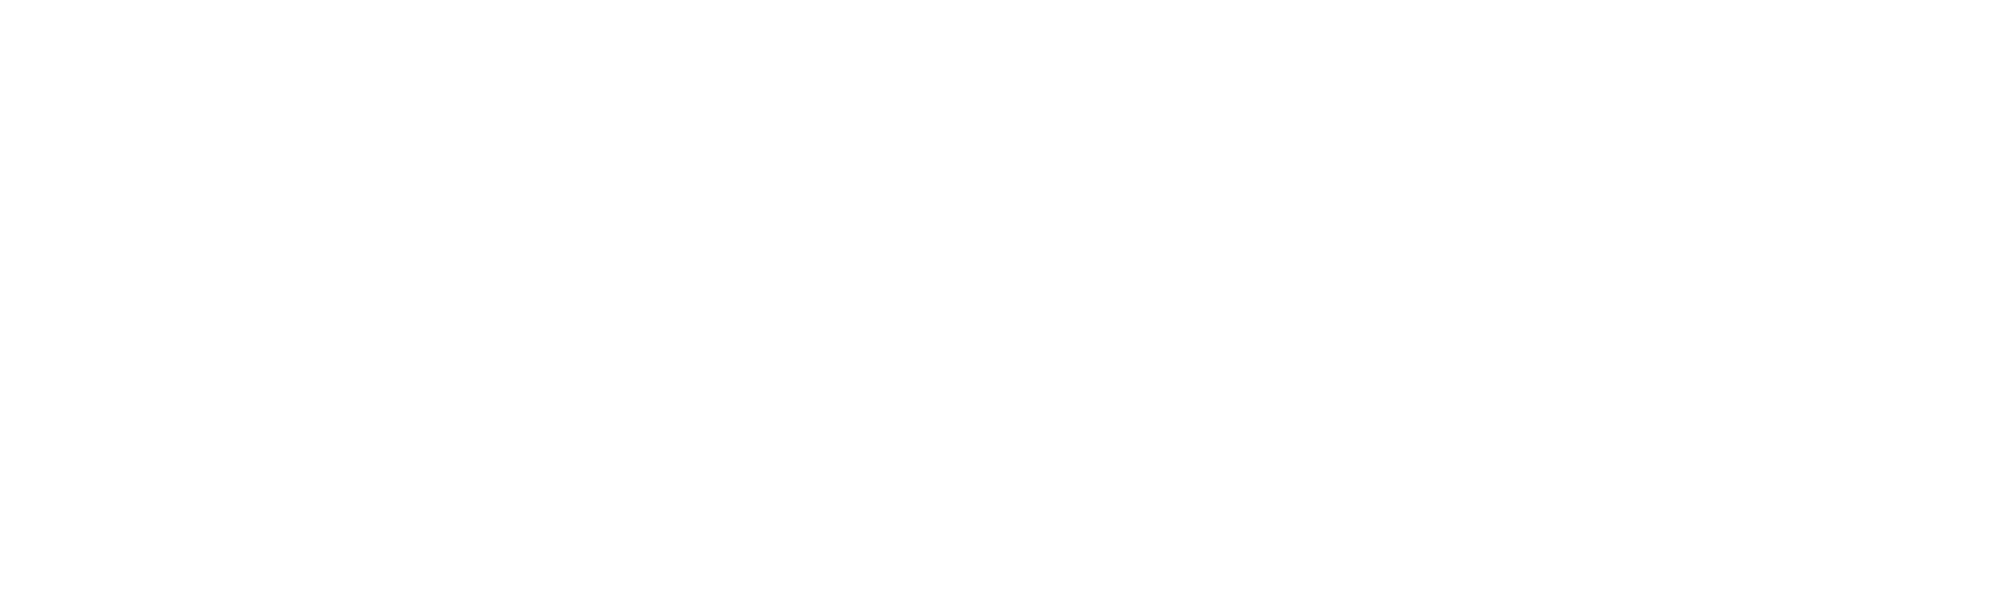 https://thewell.org.au/wp-content/uploads/2020/05/DOP-Pastoral-Formation.png